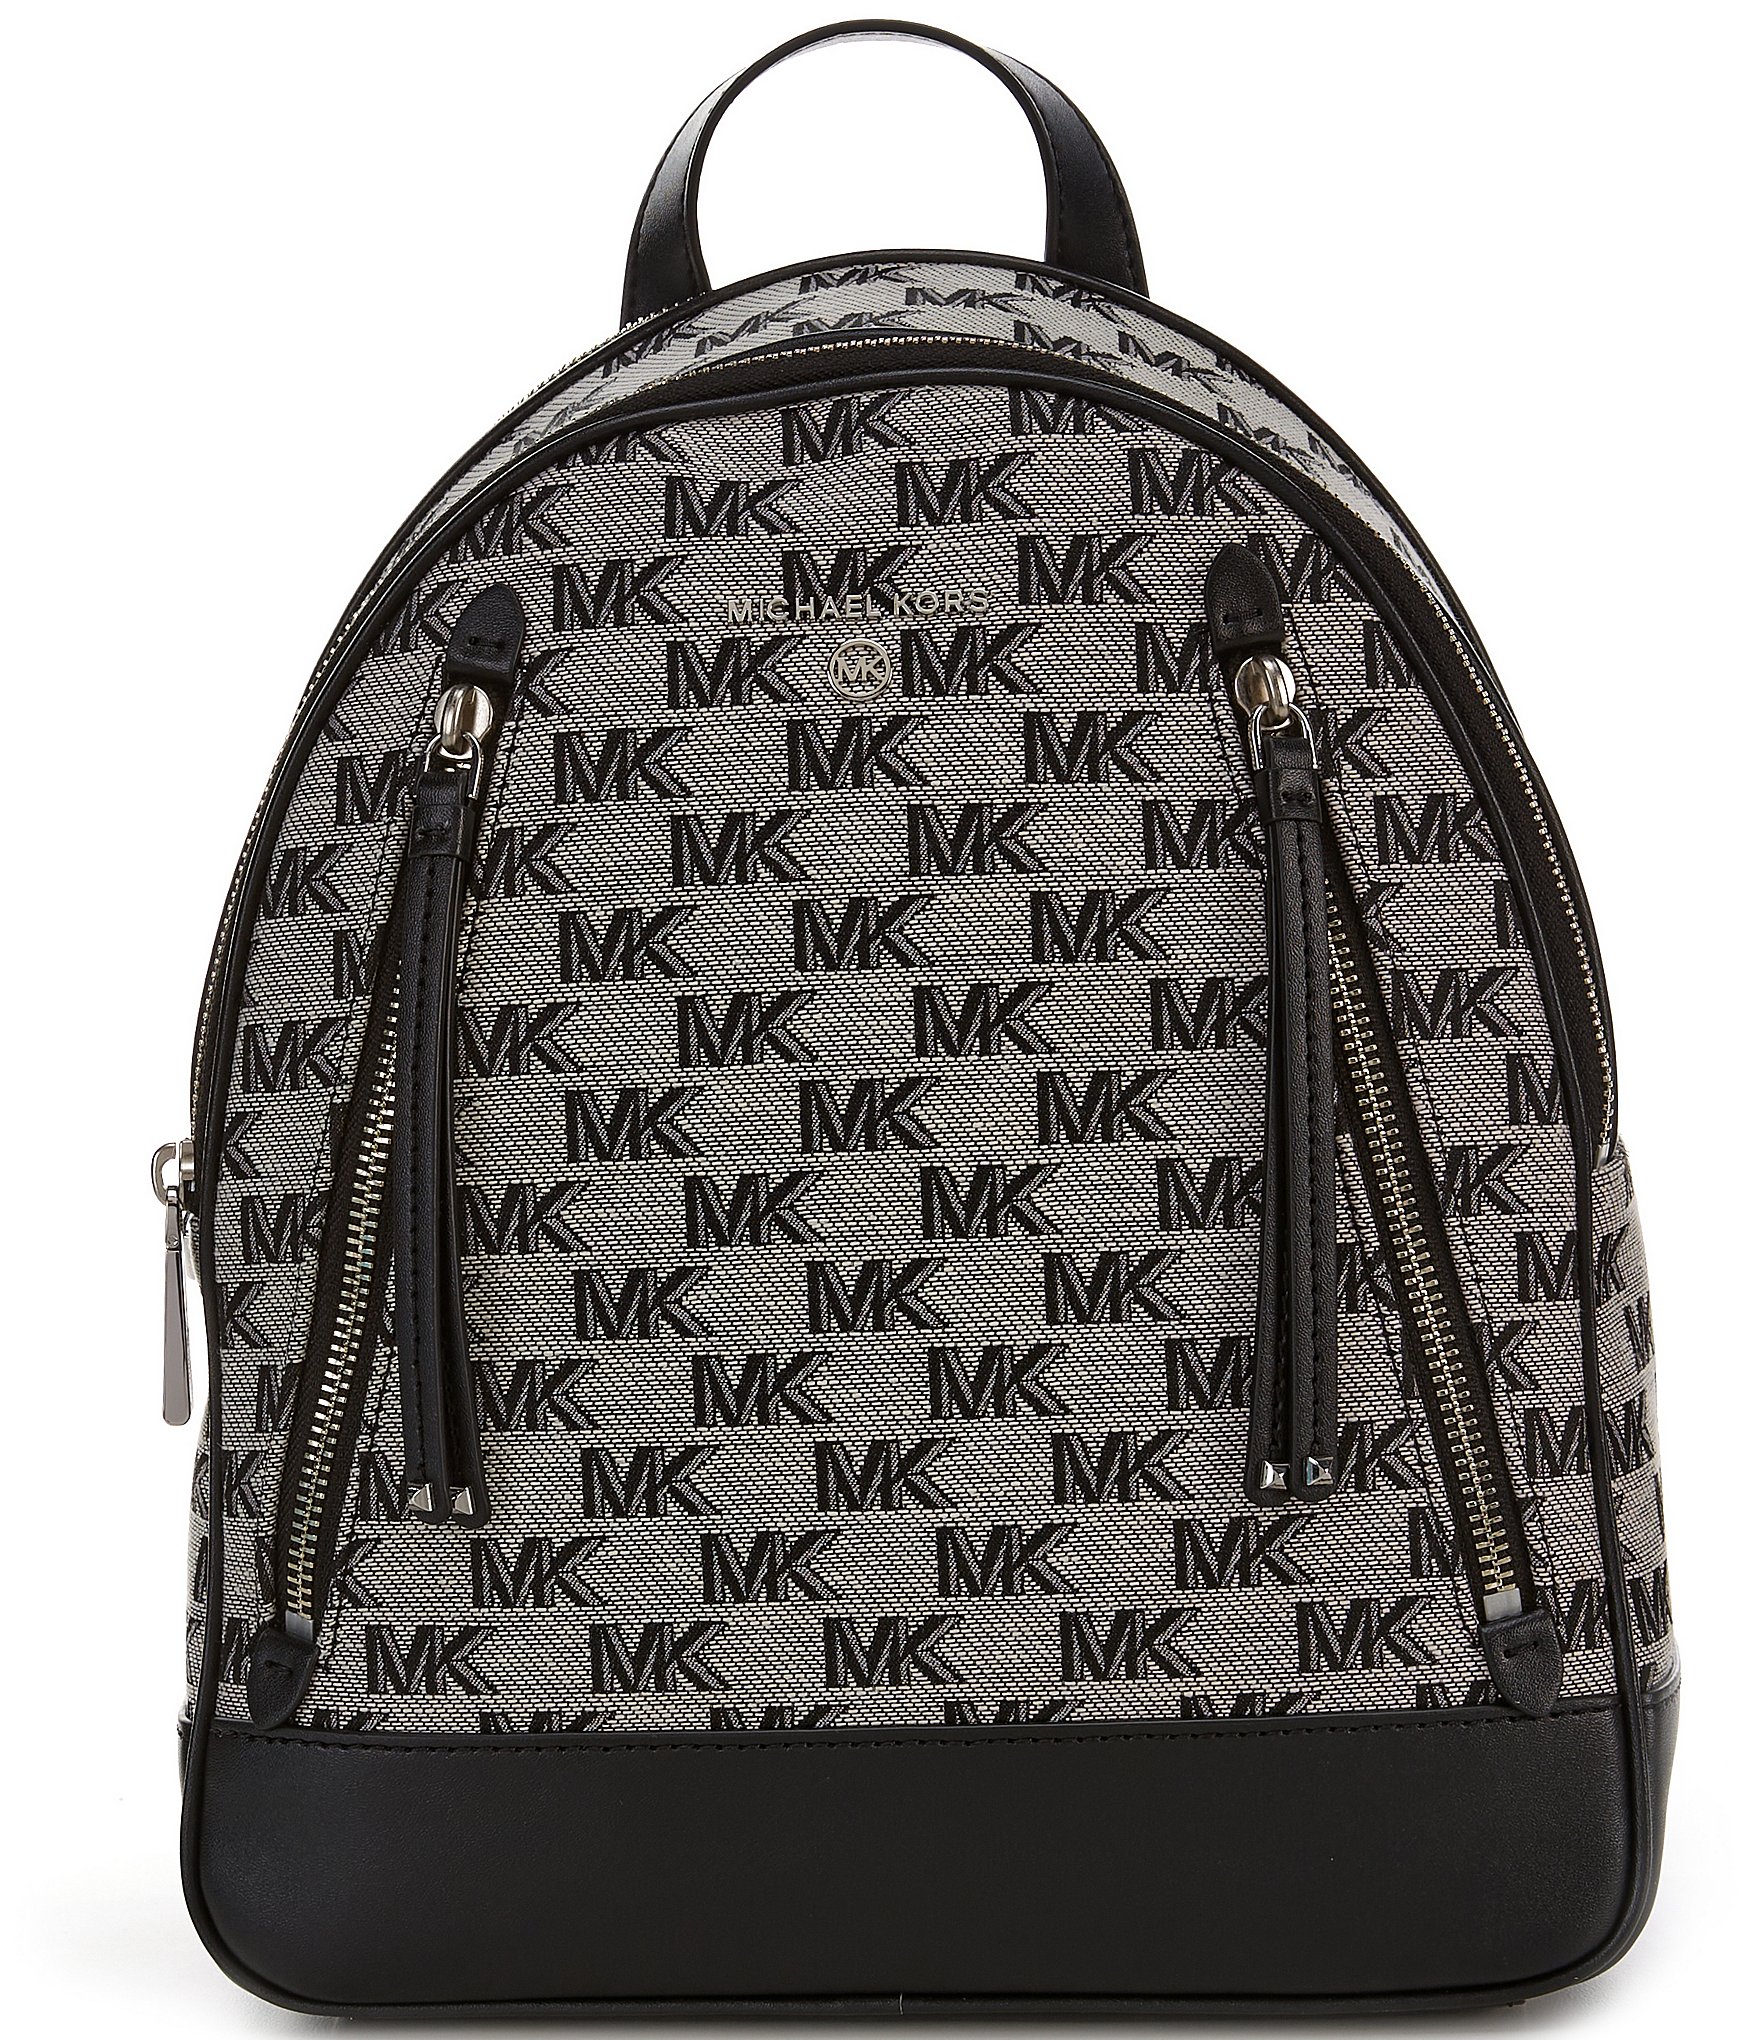 MICHAEL KORS Michael backpack in grained leather  White  Michael Kors  backpack 30R3S5EB2L online on GIGLIOCOM